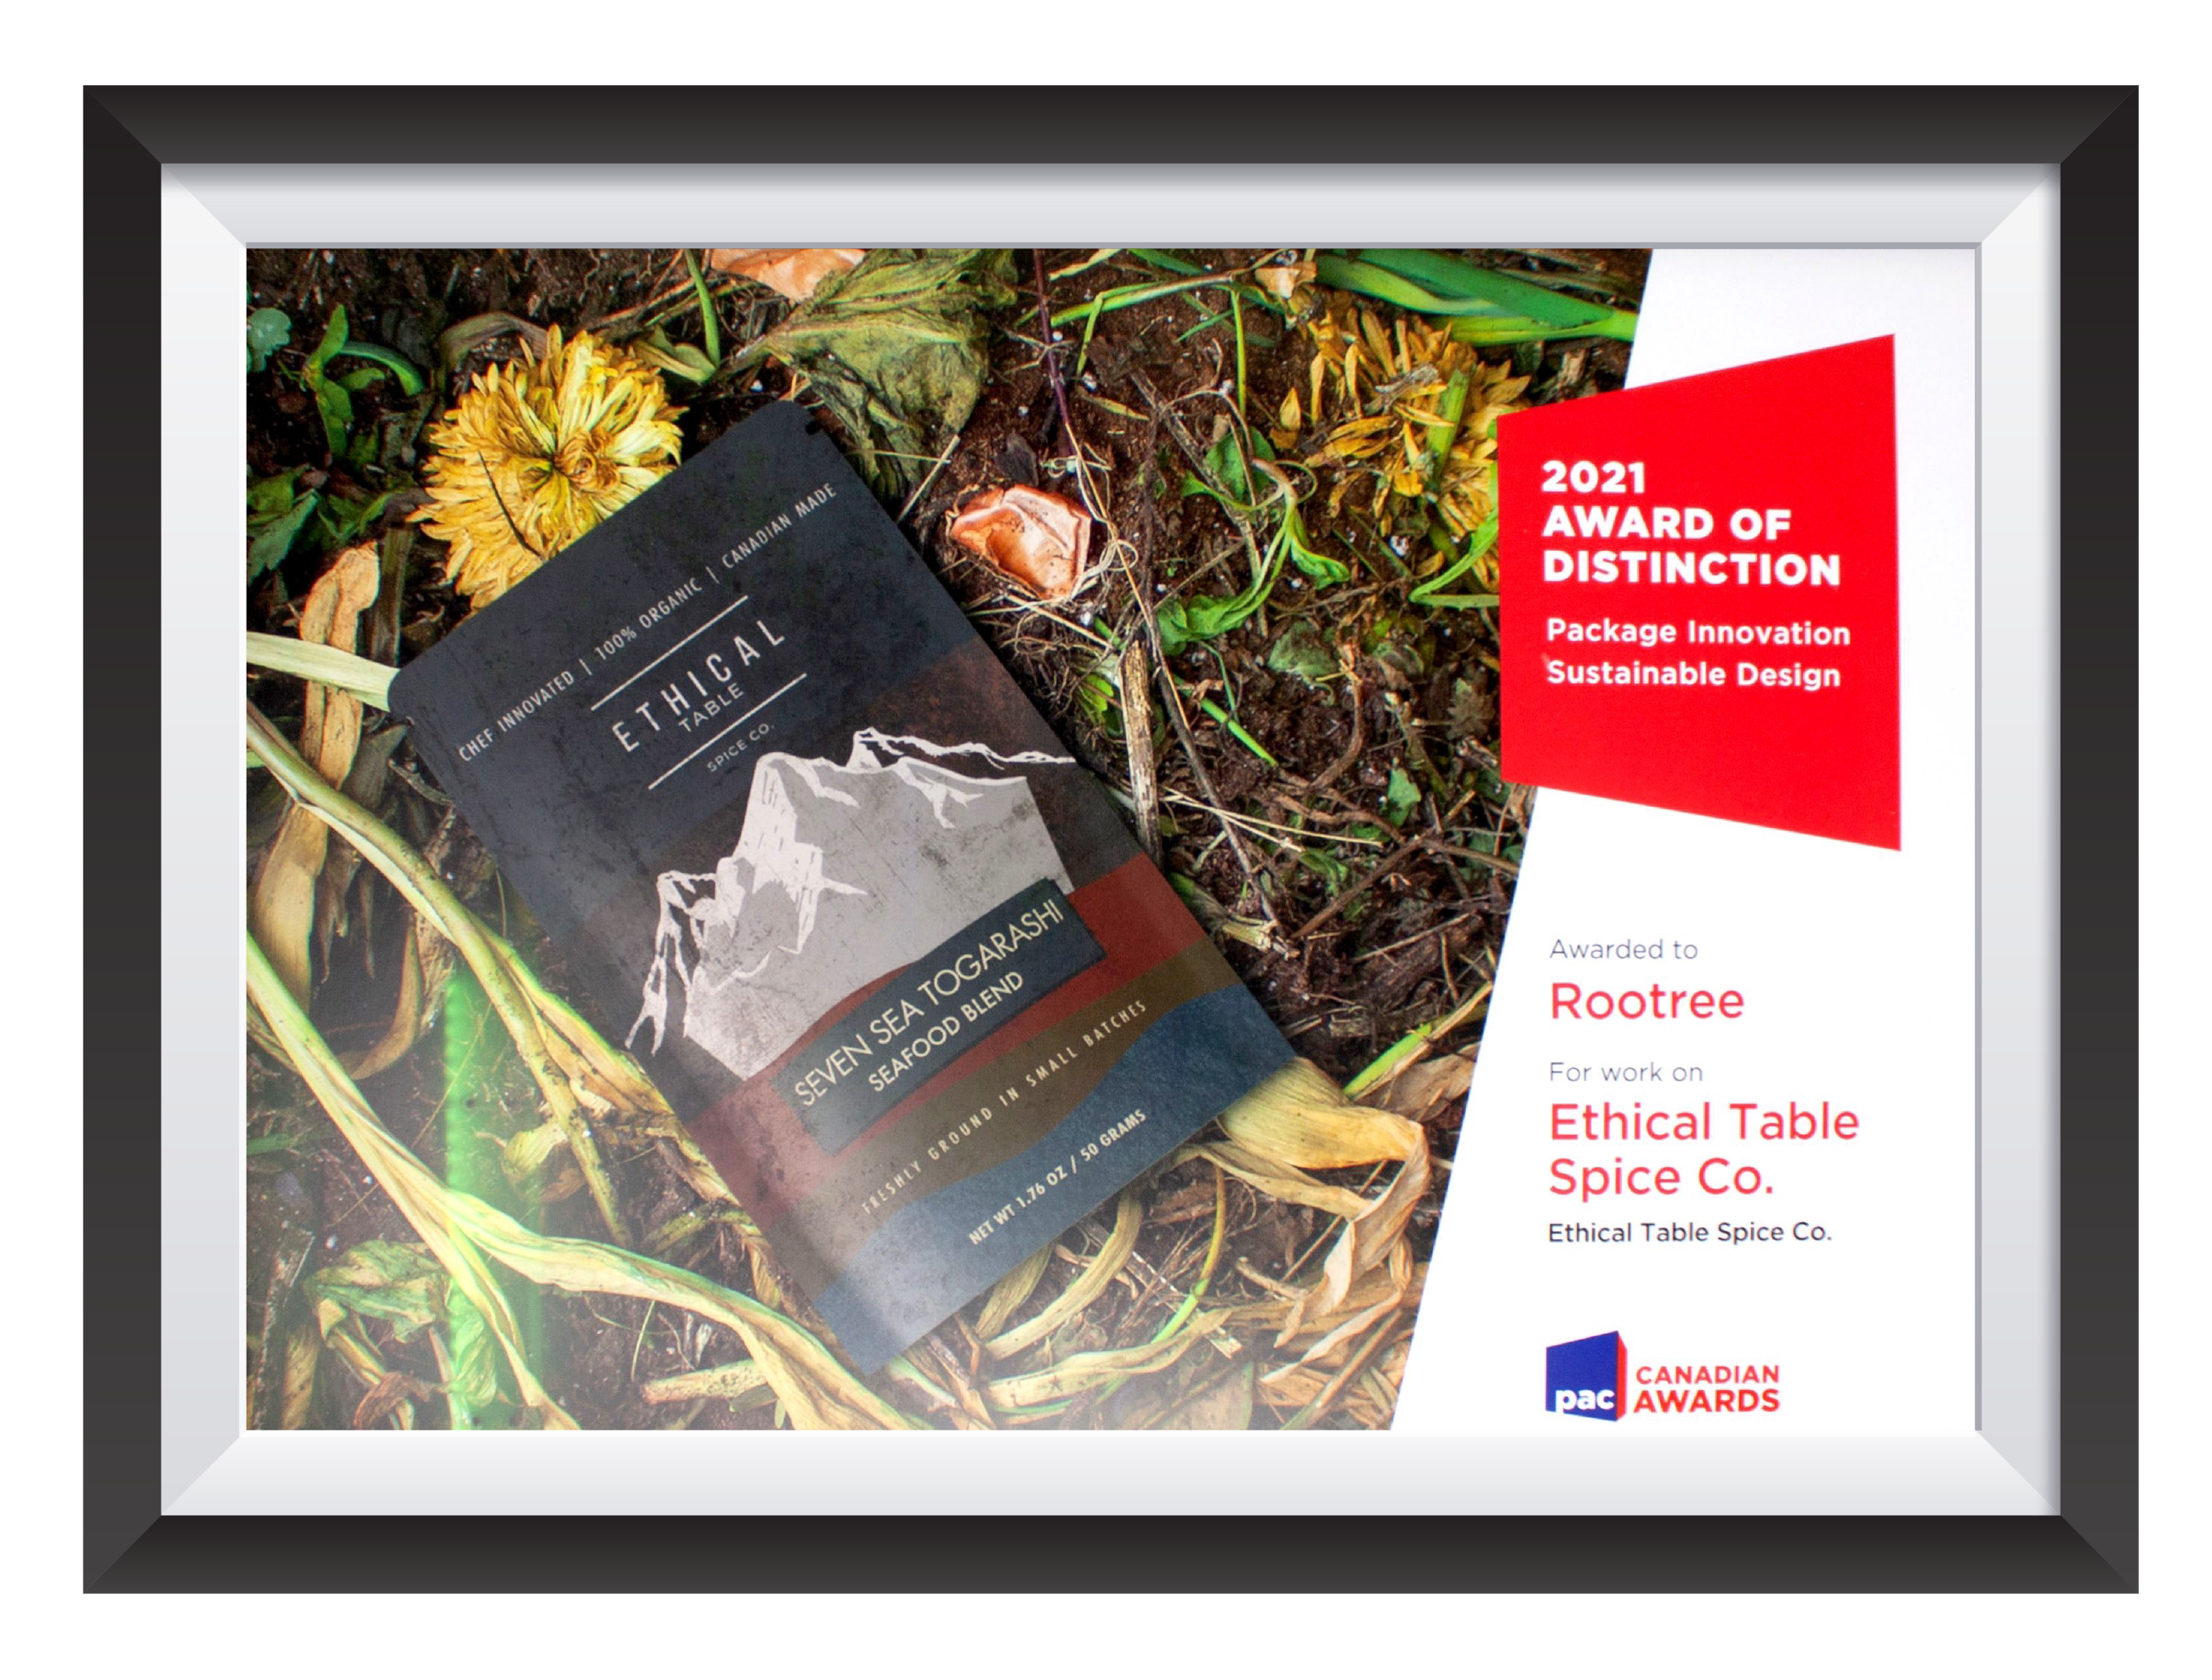 Rootree x Ethical Table PAC Award in Frame